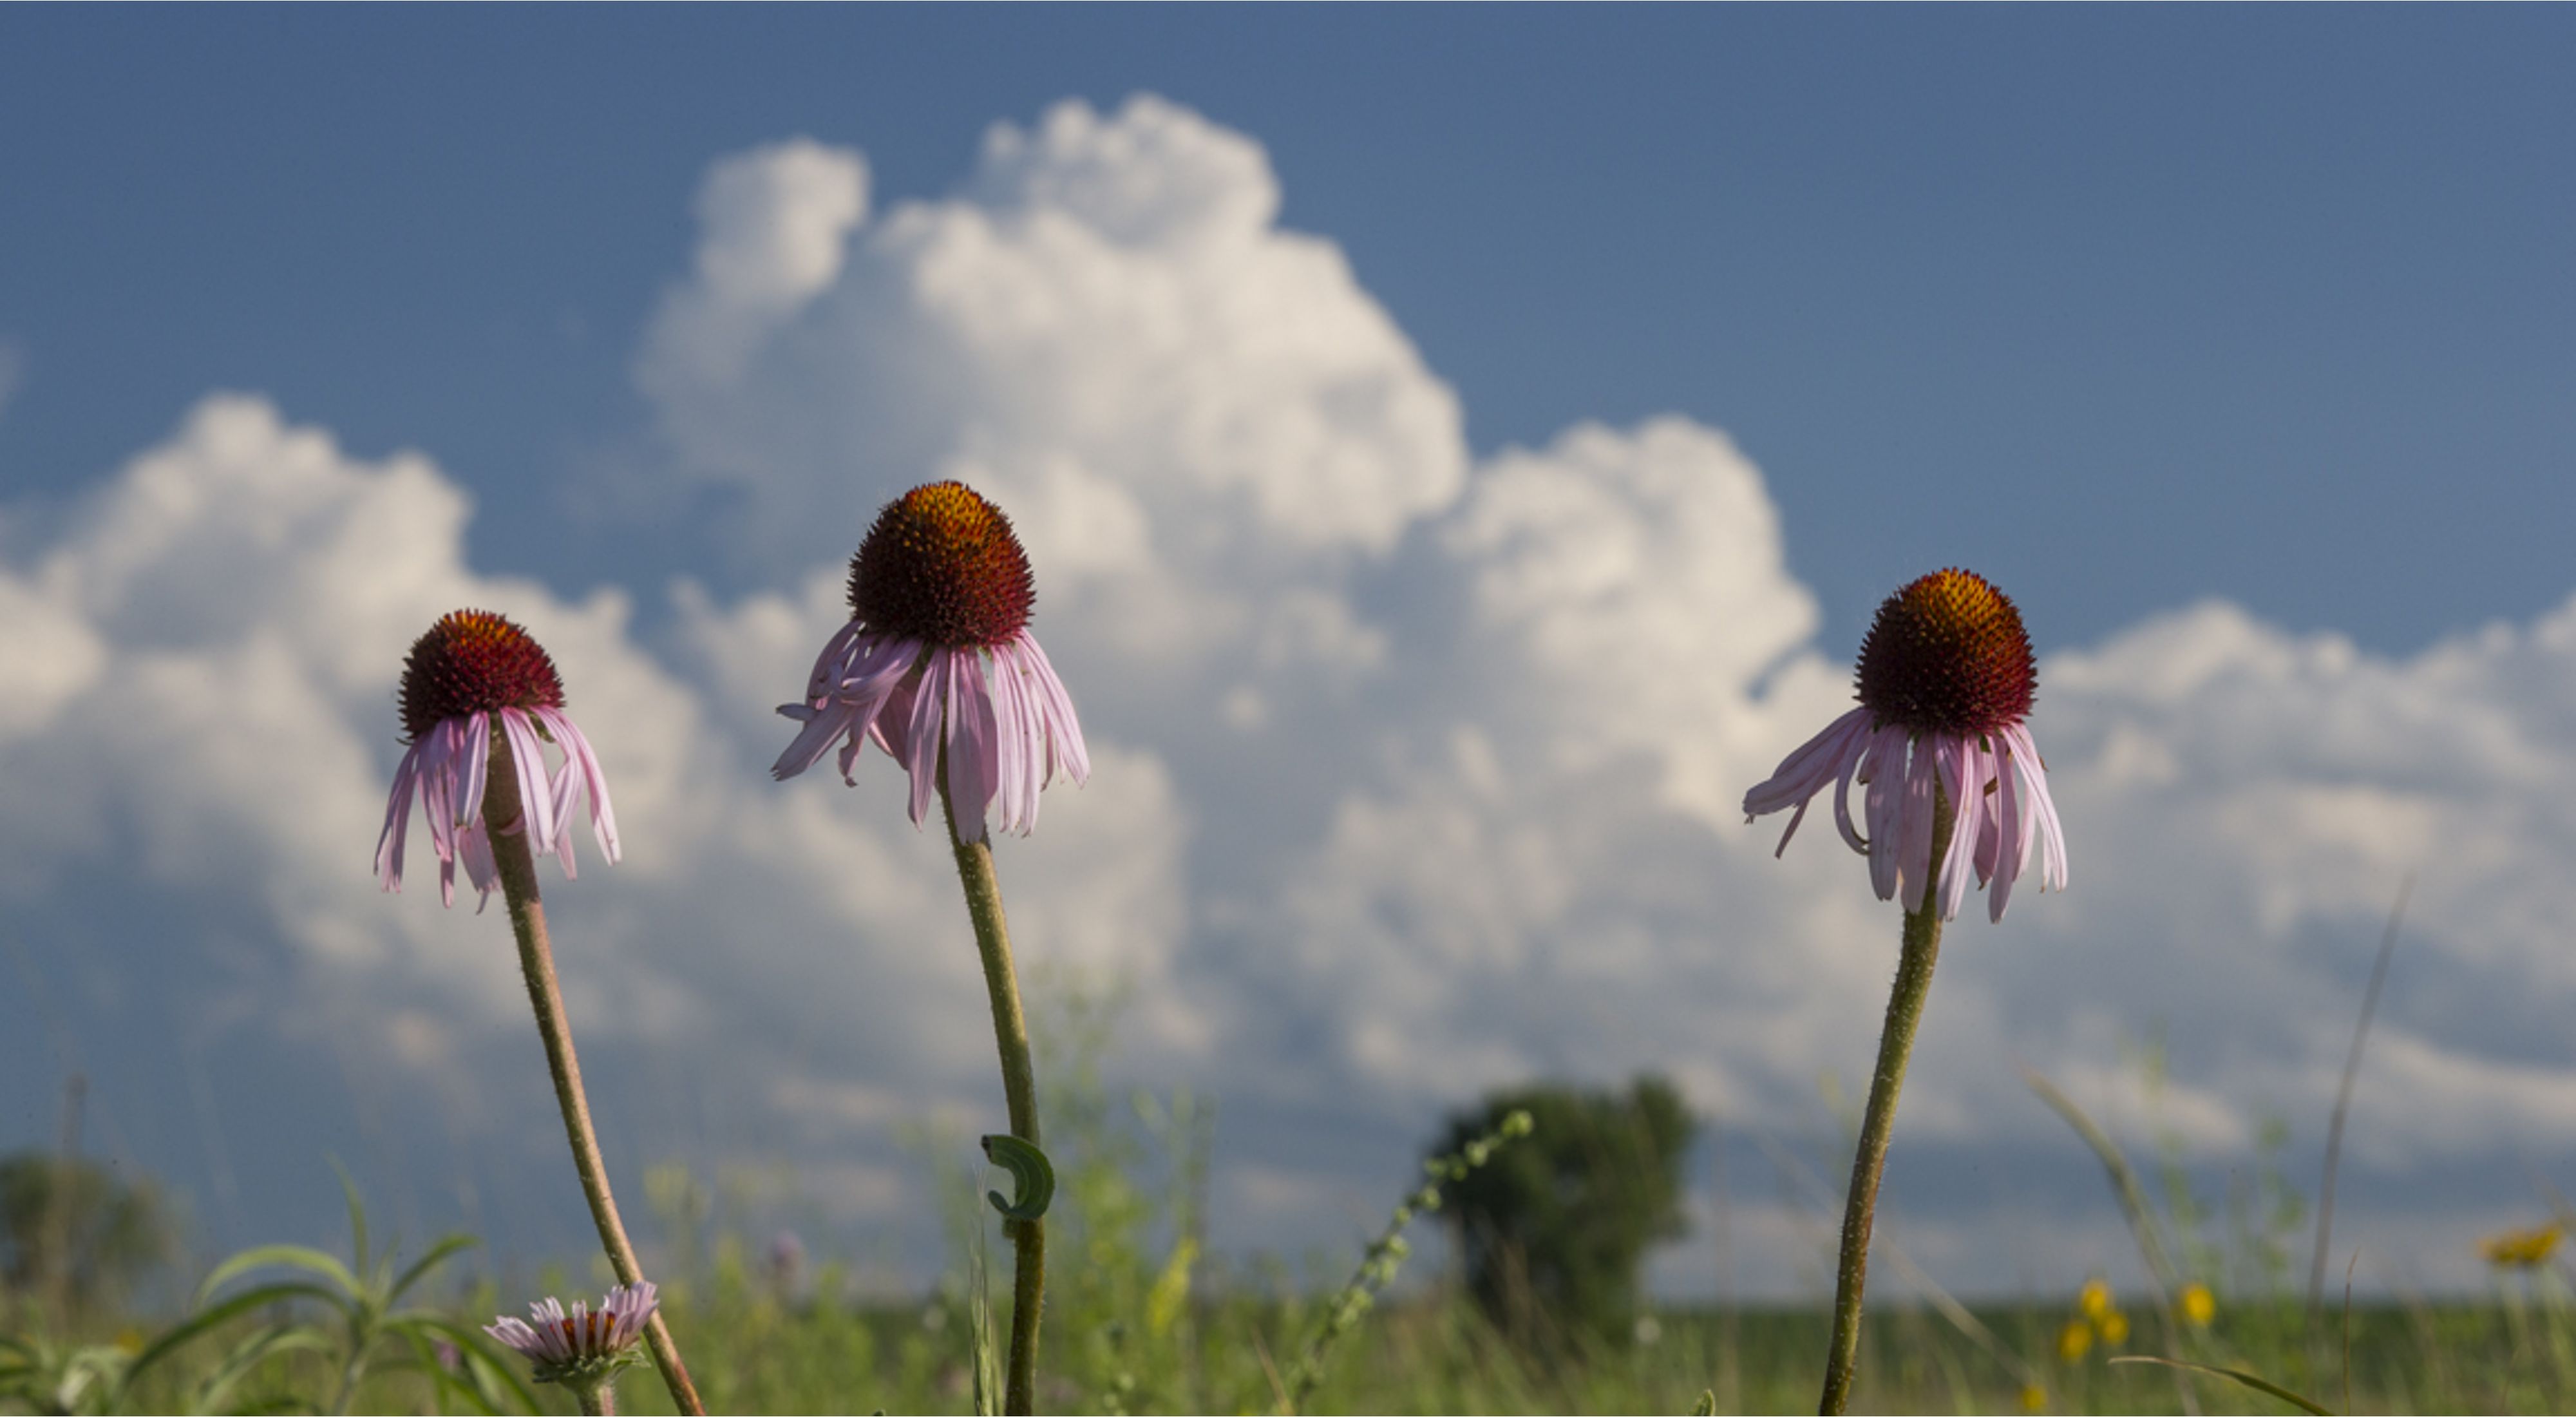 Closeup of three echinacea plants flowering in a prairie under a blue sky with puffy white clouds.